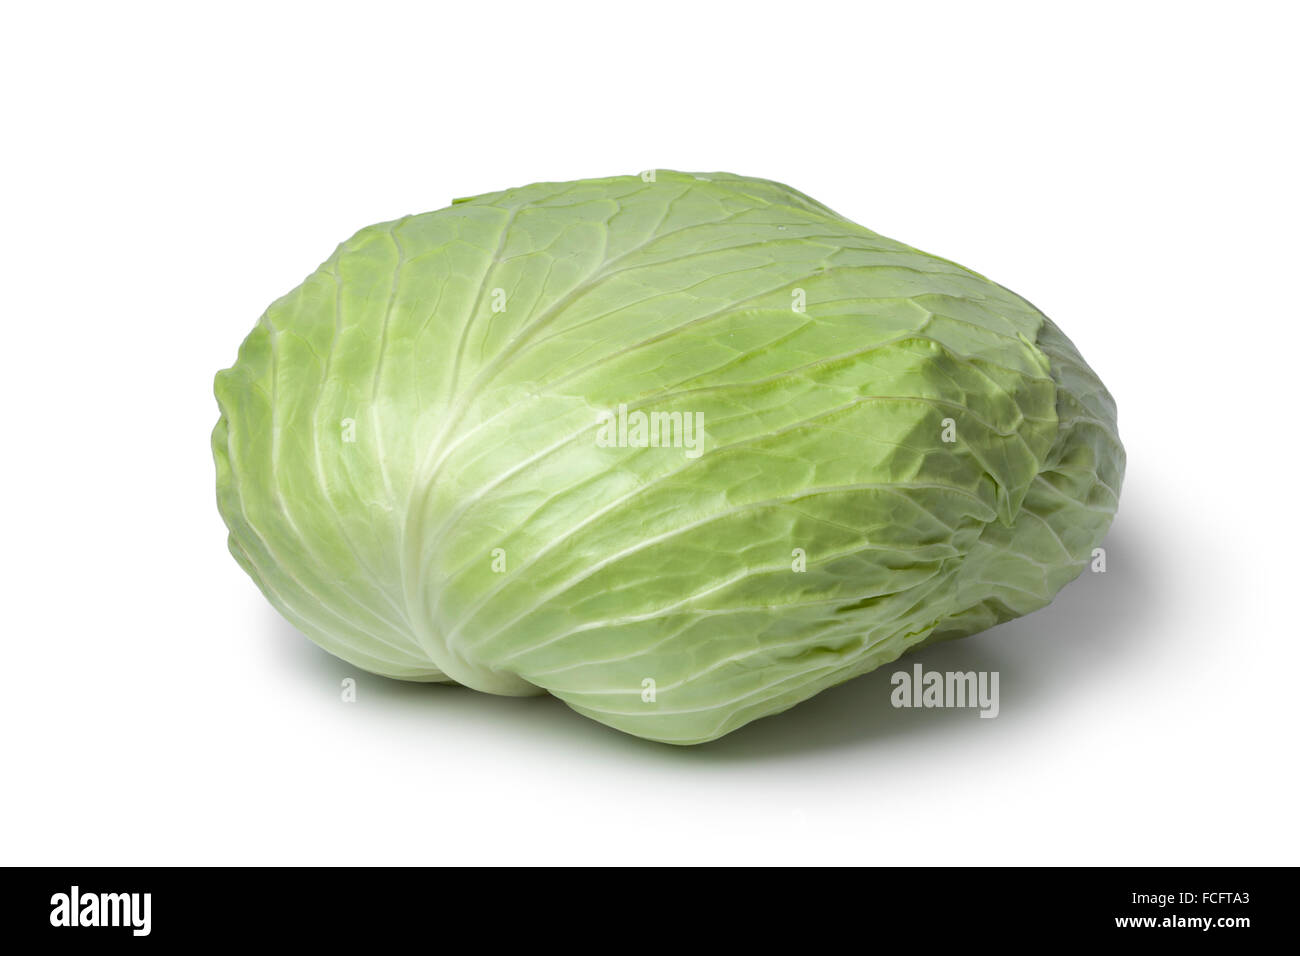 Whole coolwrap cabbage  on white background Stock Photo